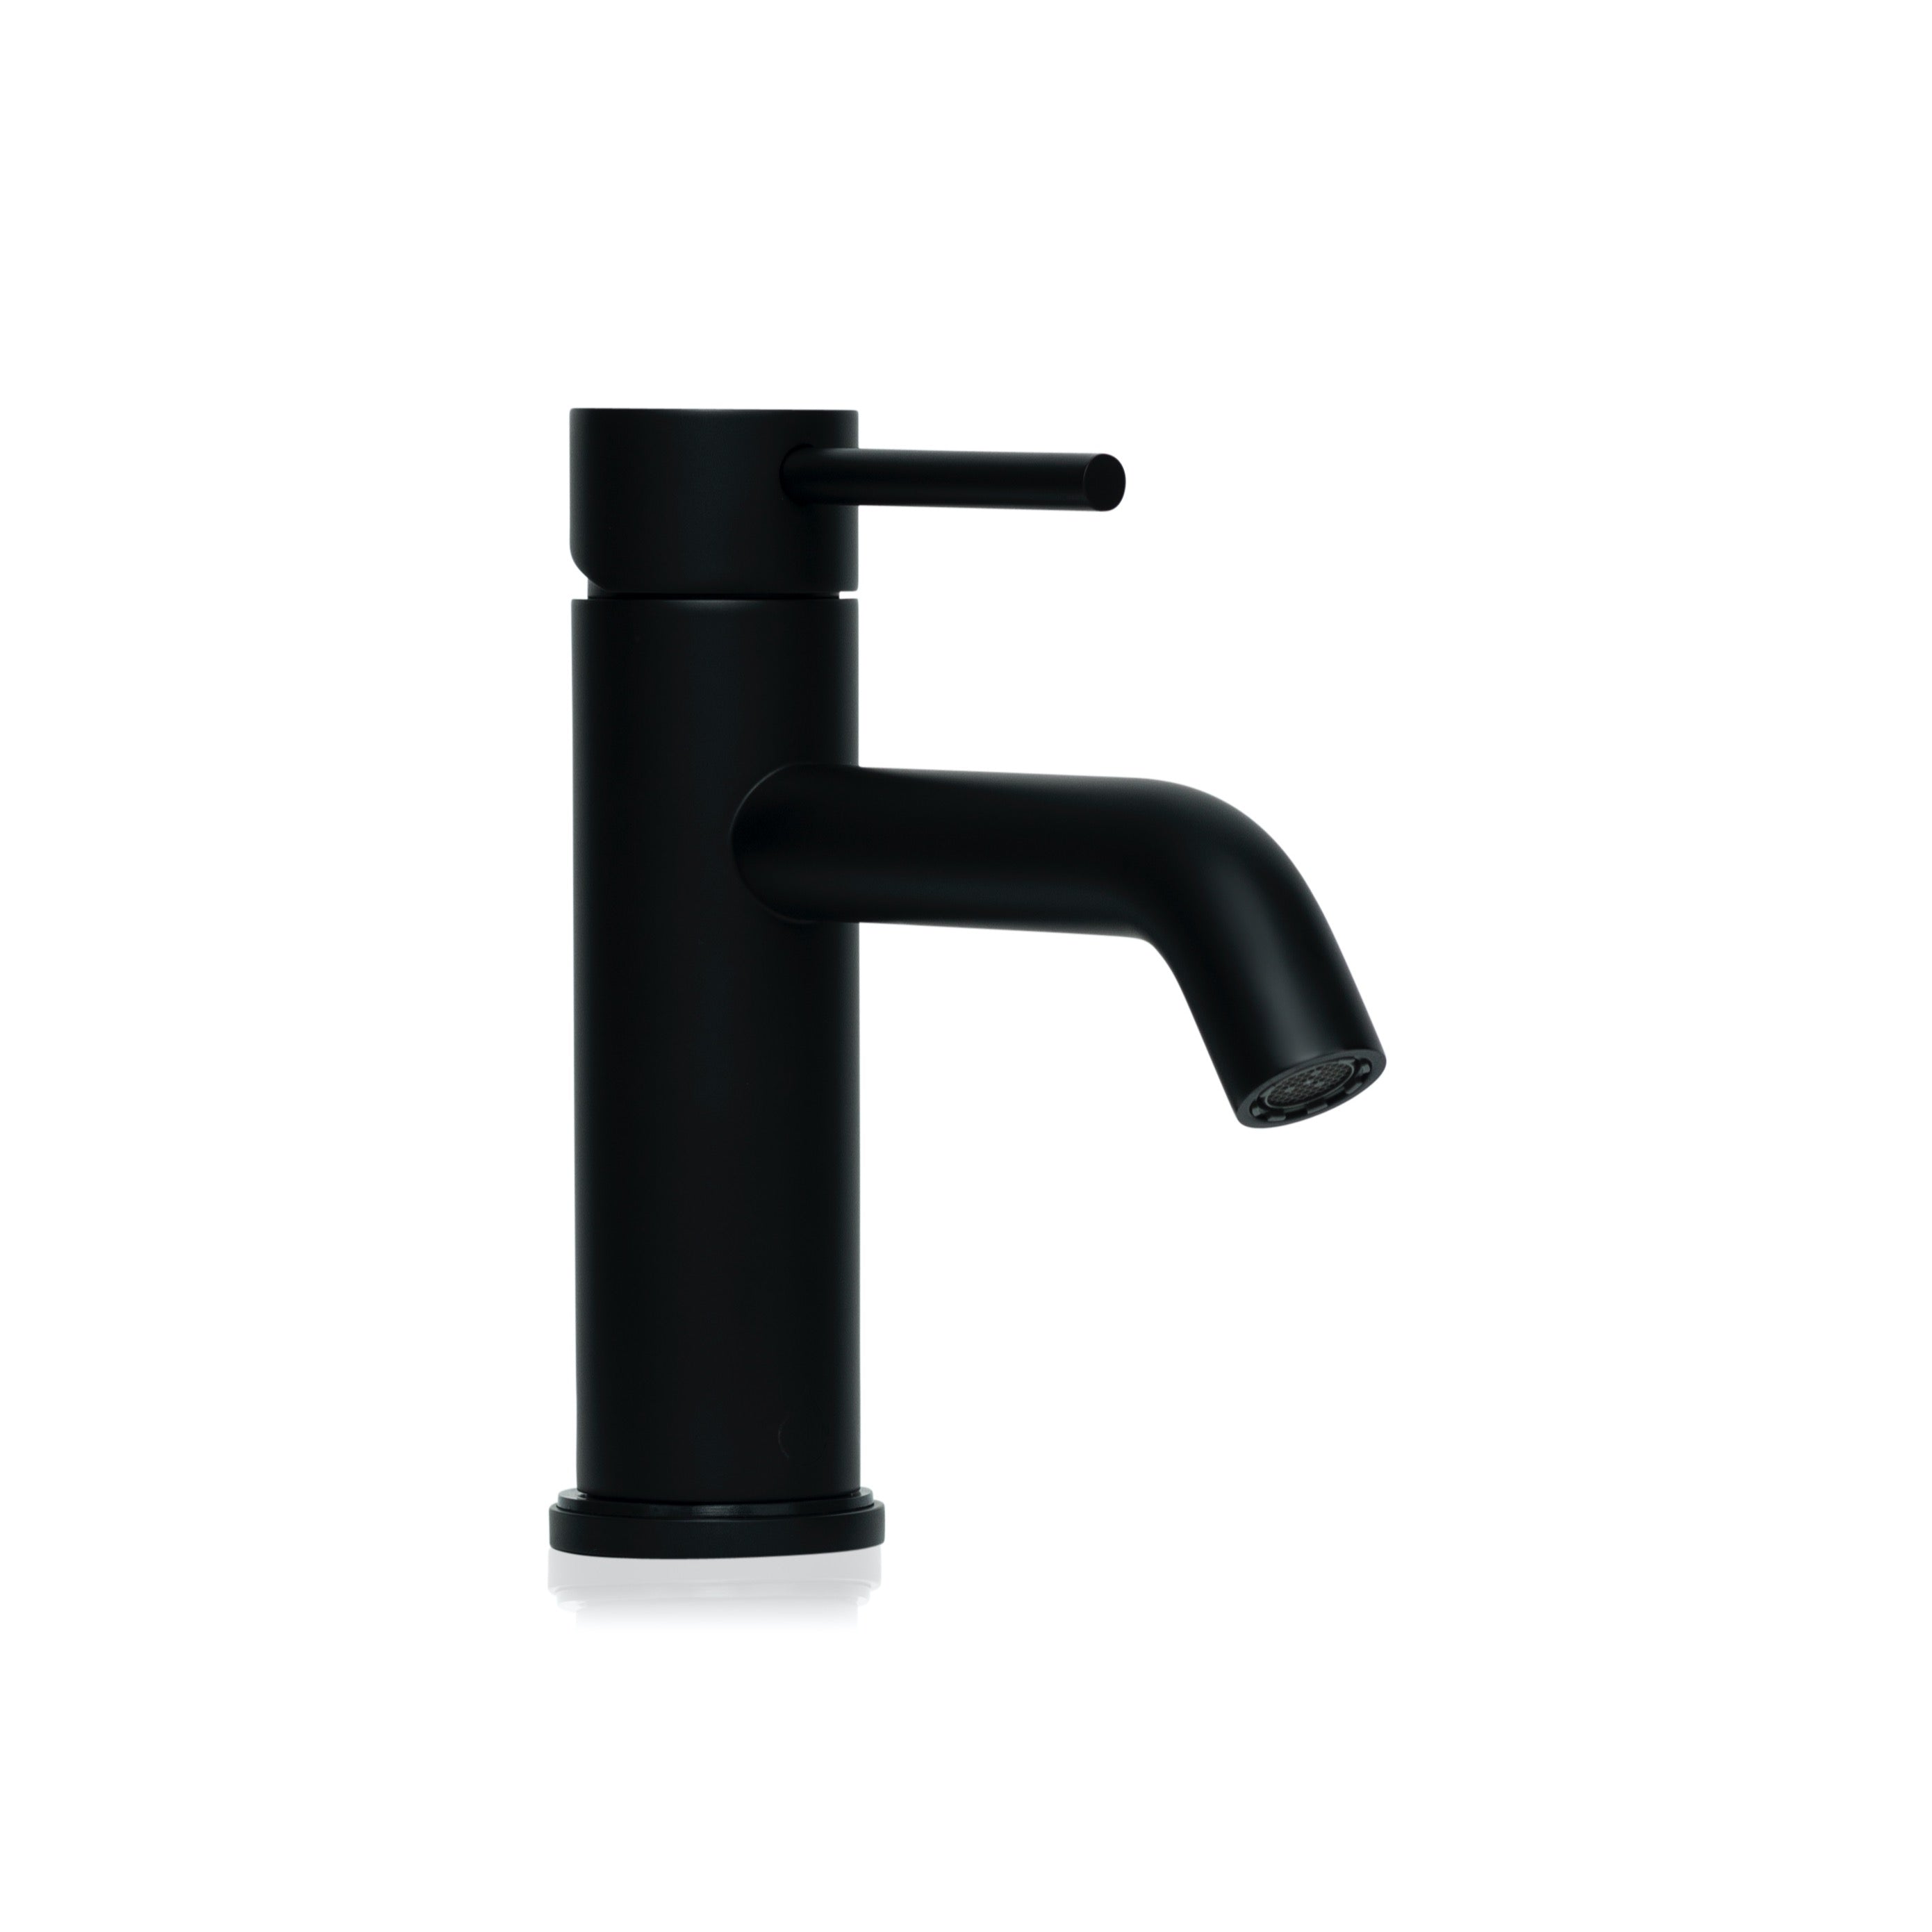 Bondi Pin Lever Basin Mixer with Curved Spout in Matte Black